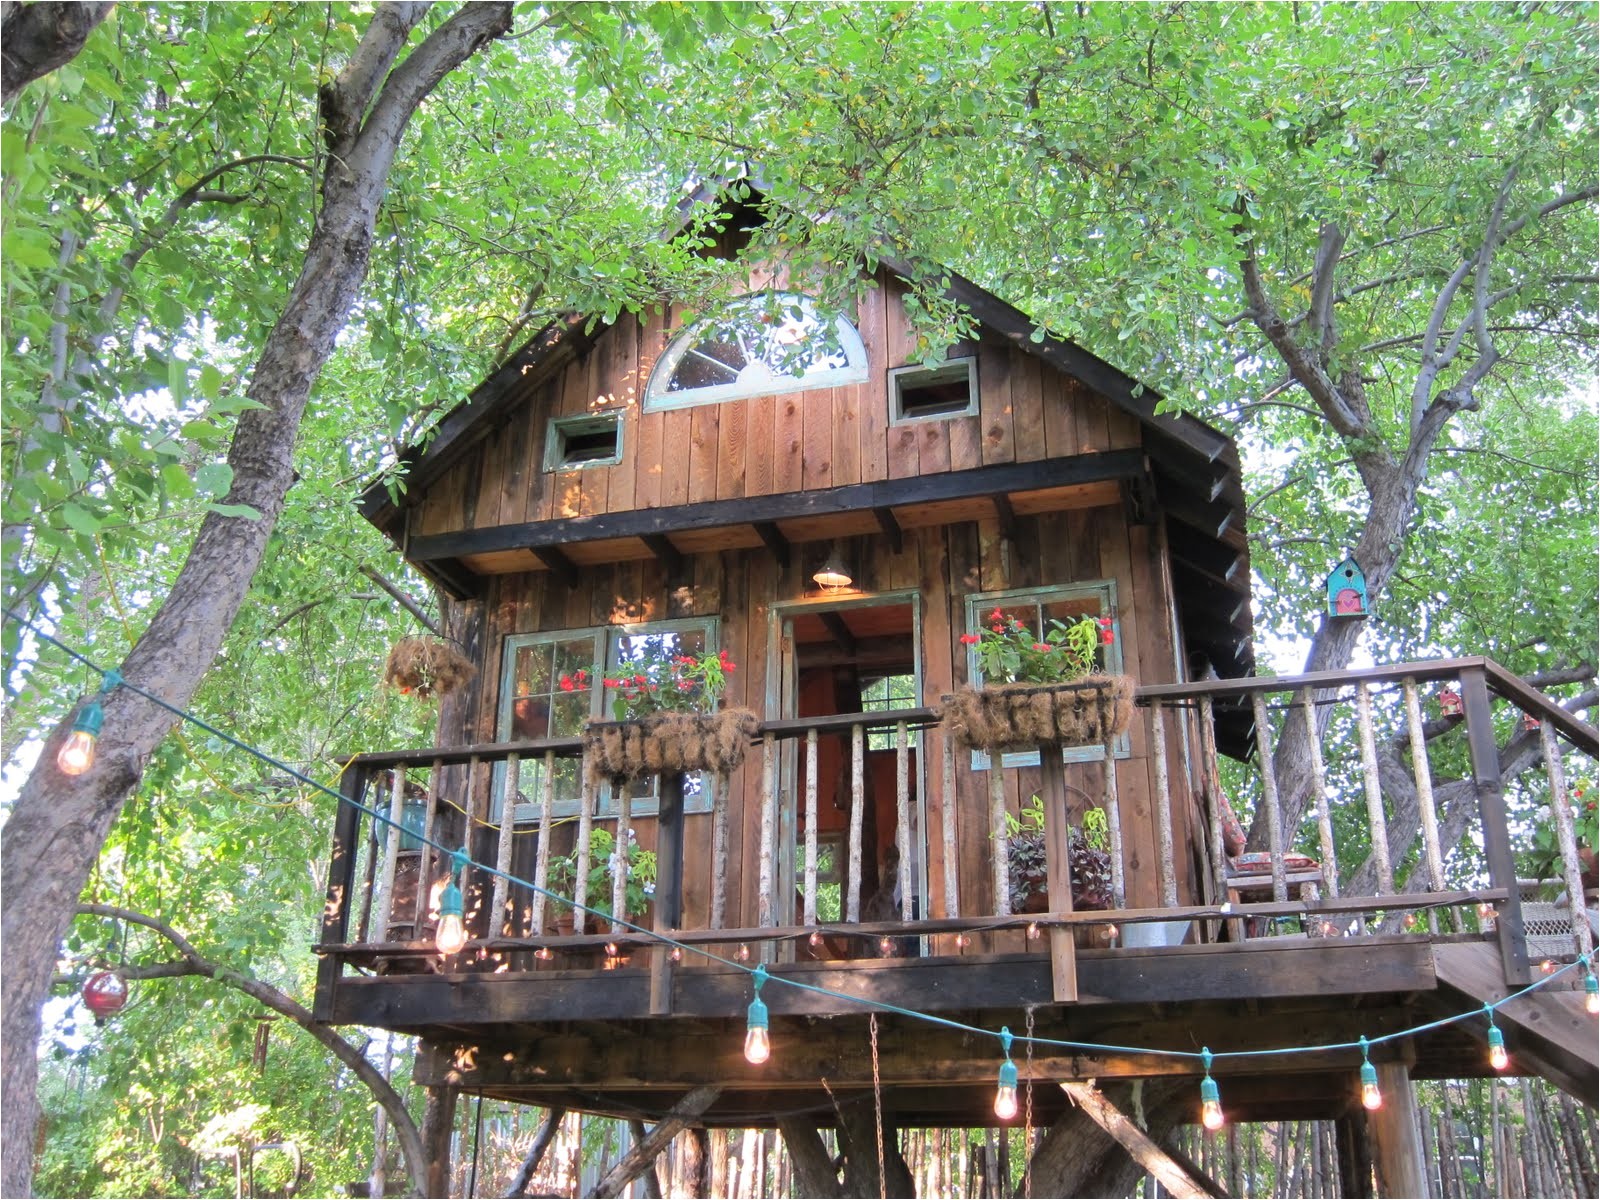 large tree houses with classy lighting design for large tree houses for sale